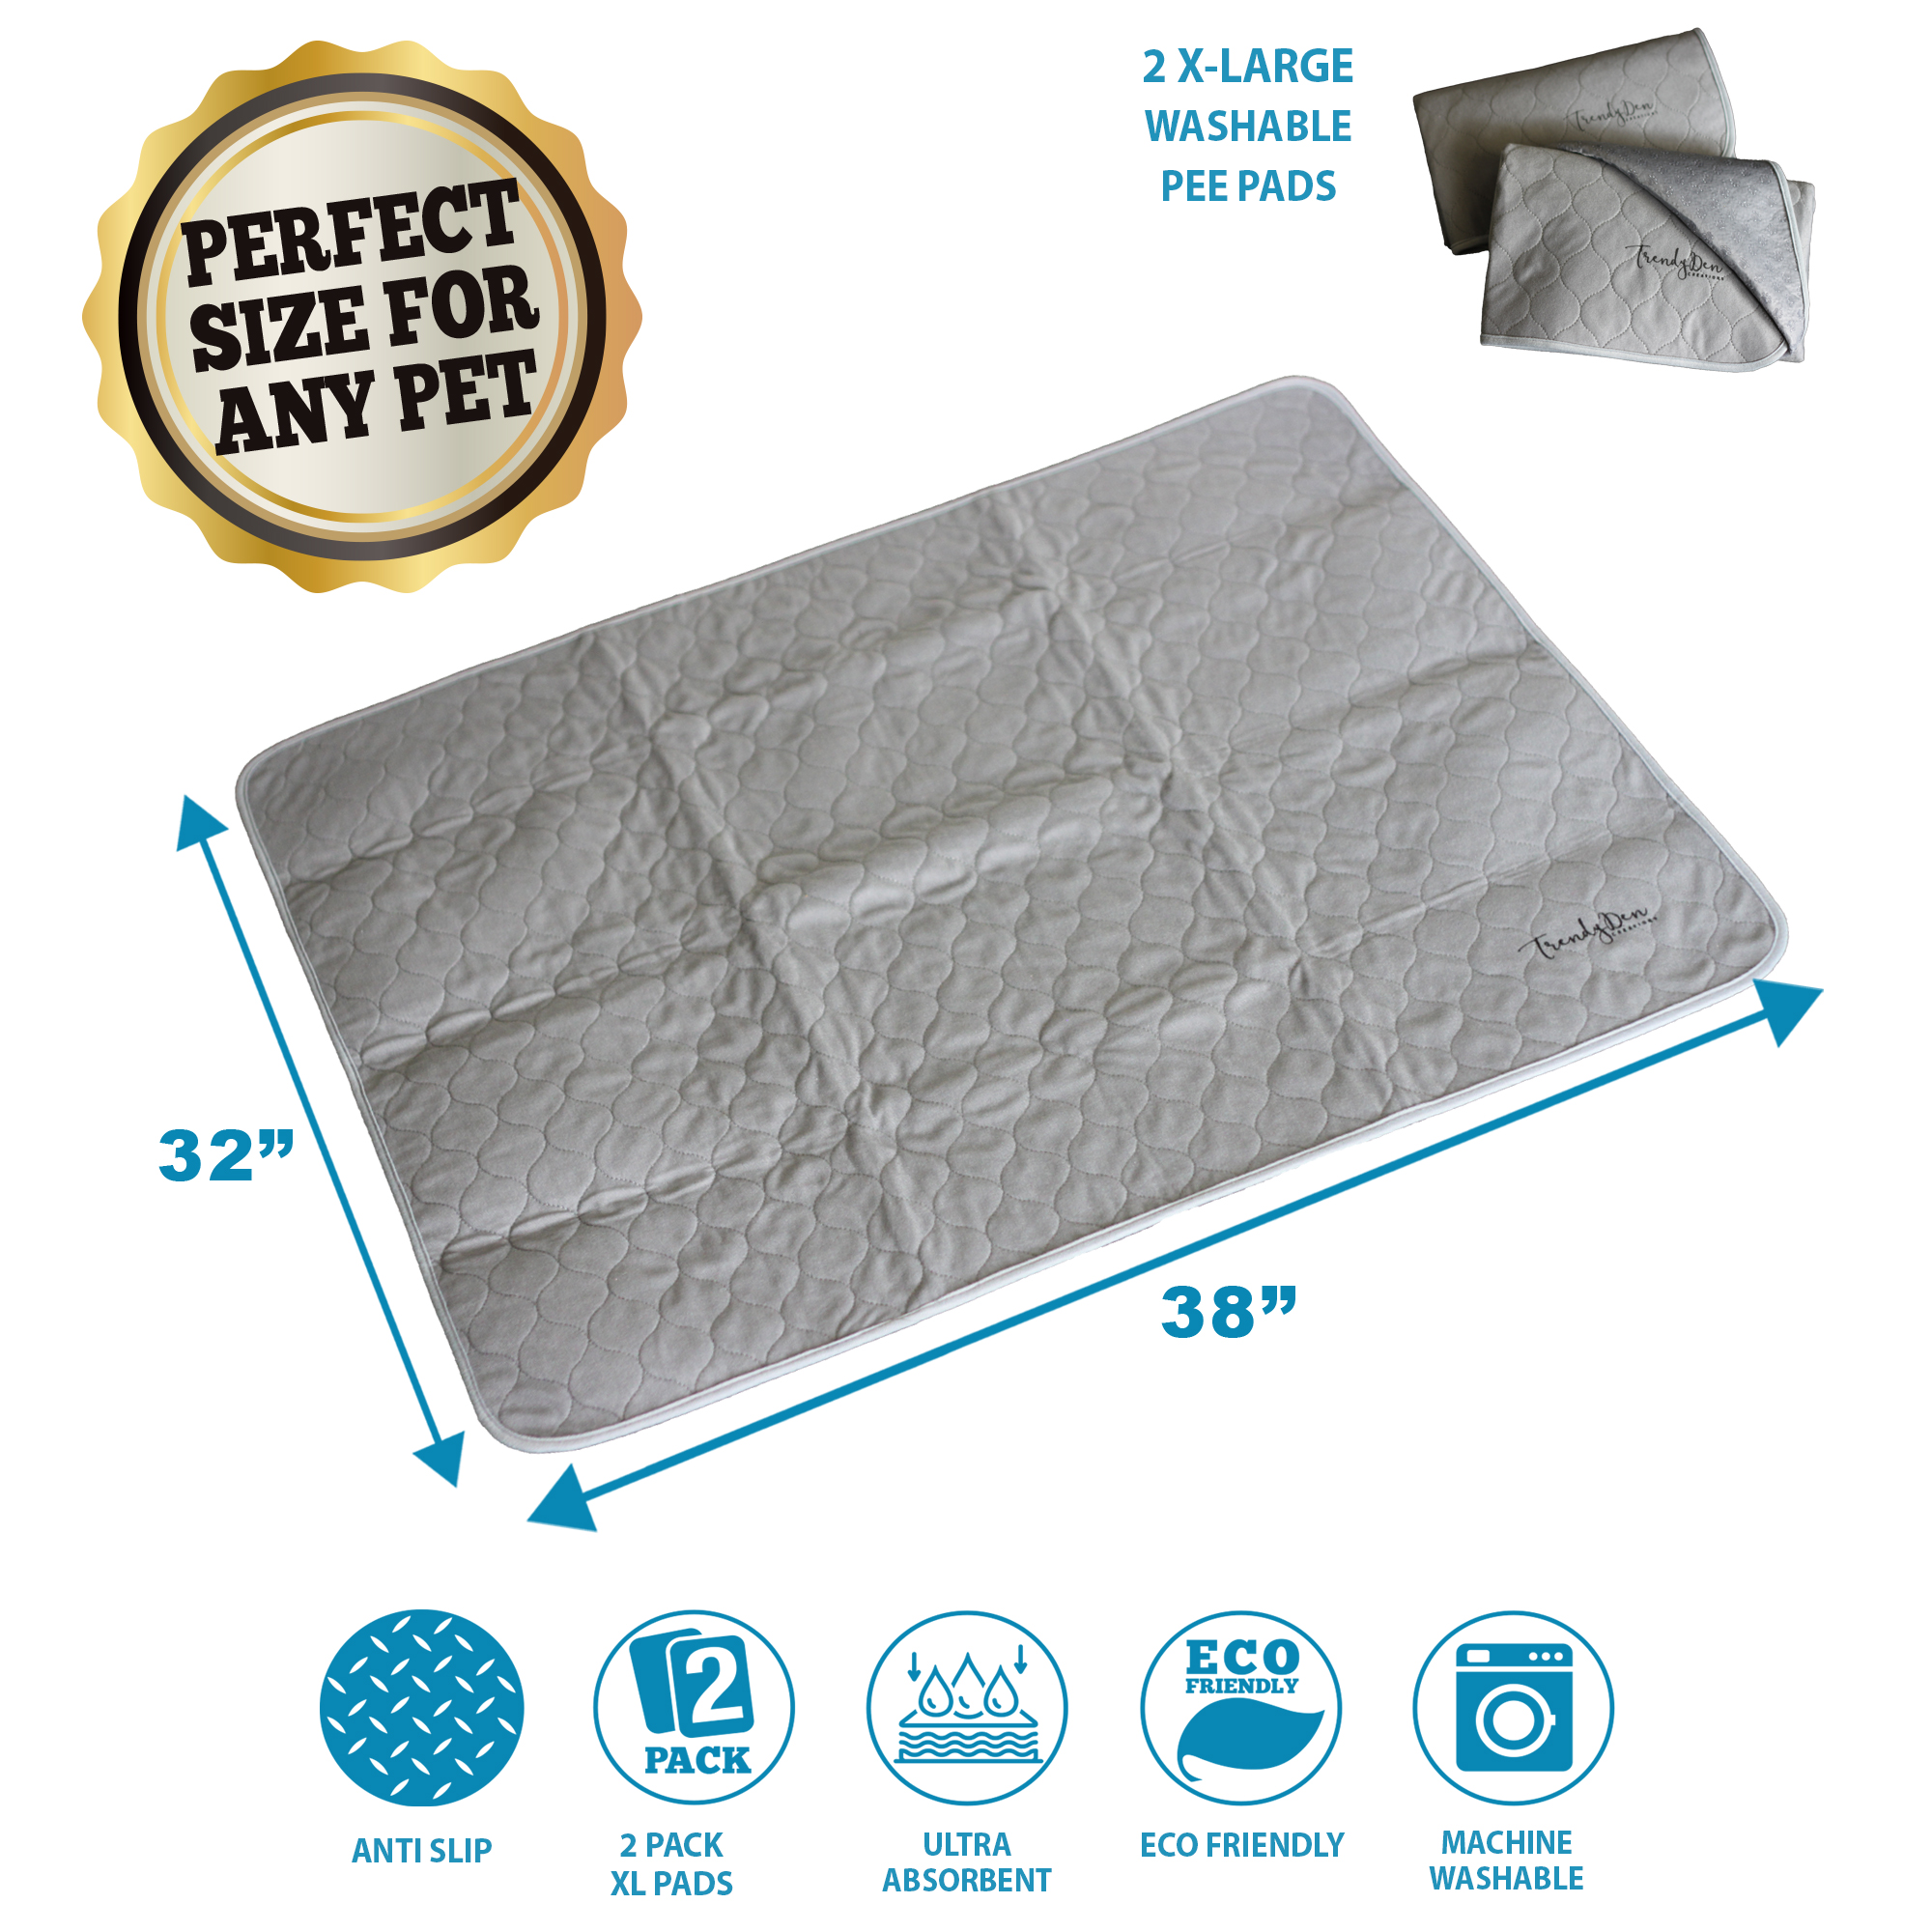 Washable Pee Pads for Dogs – XX-Large - Trendy Den Creations®